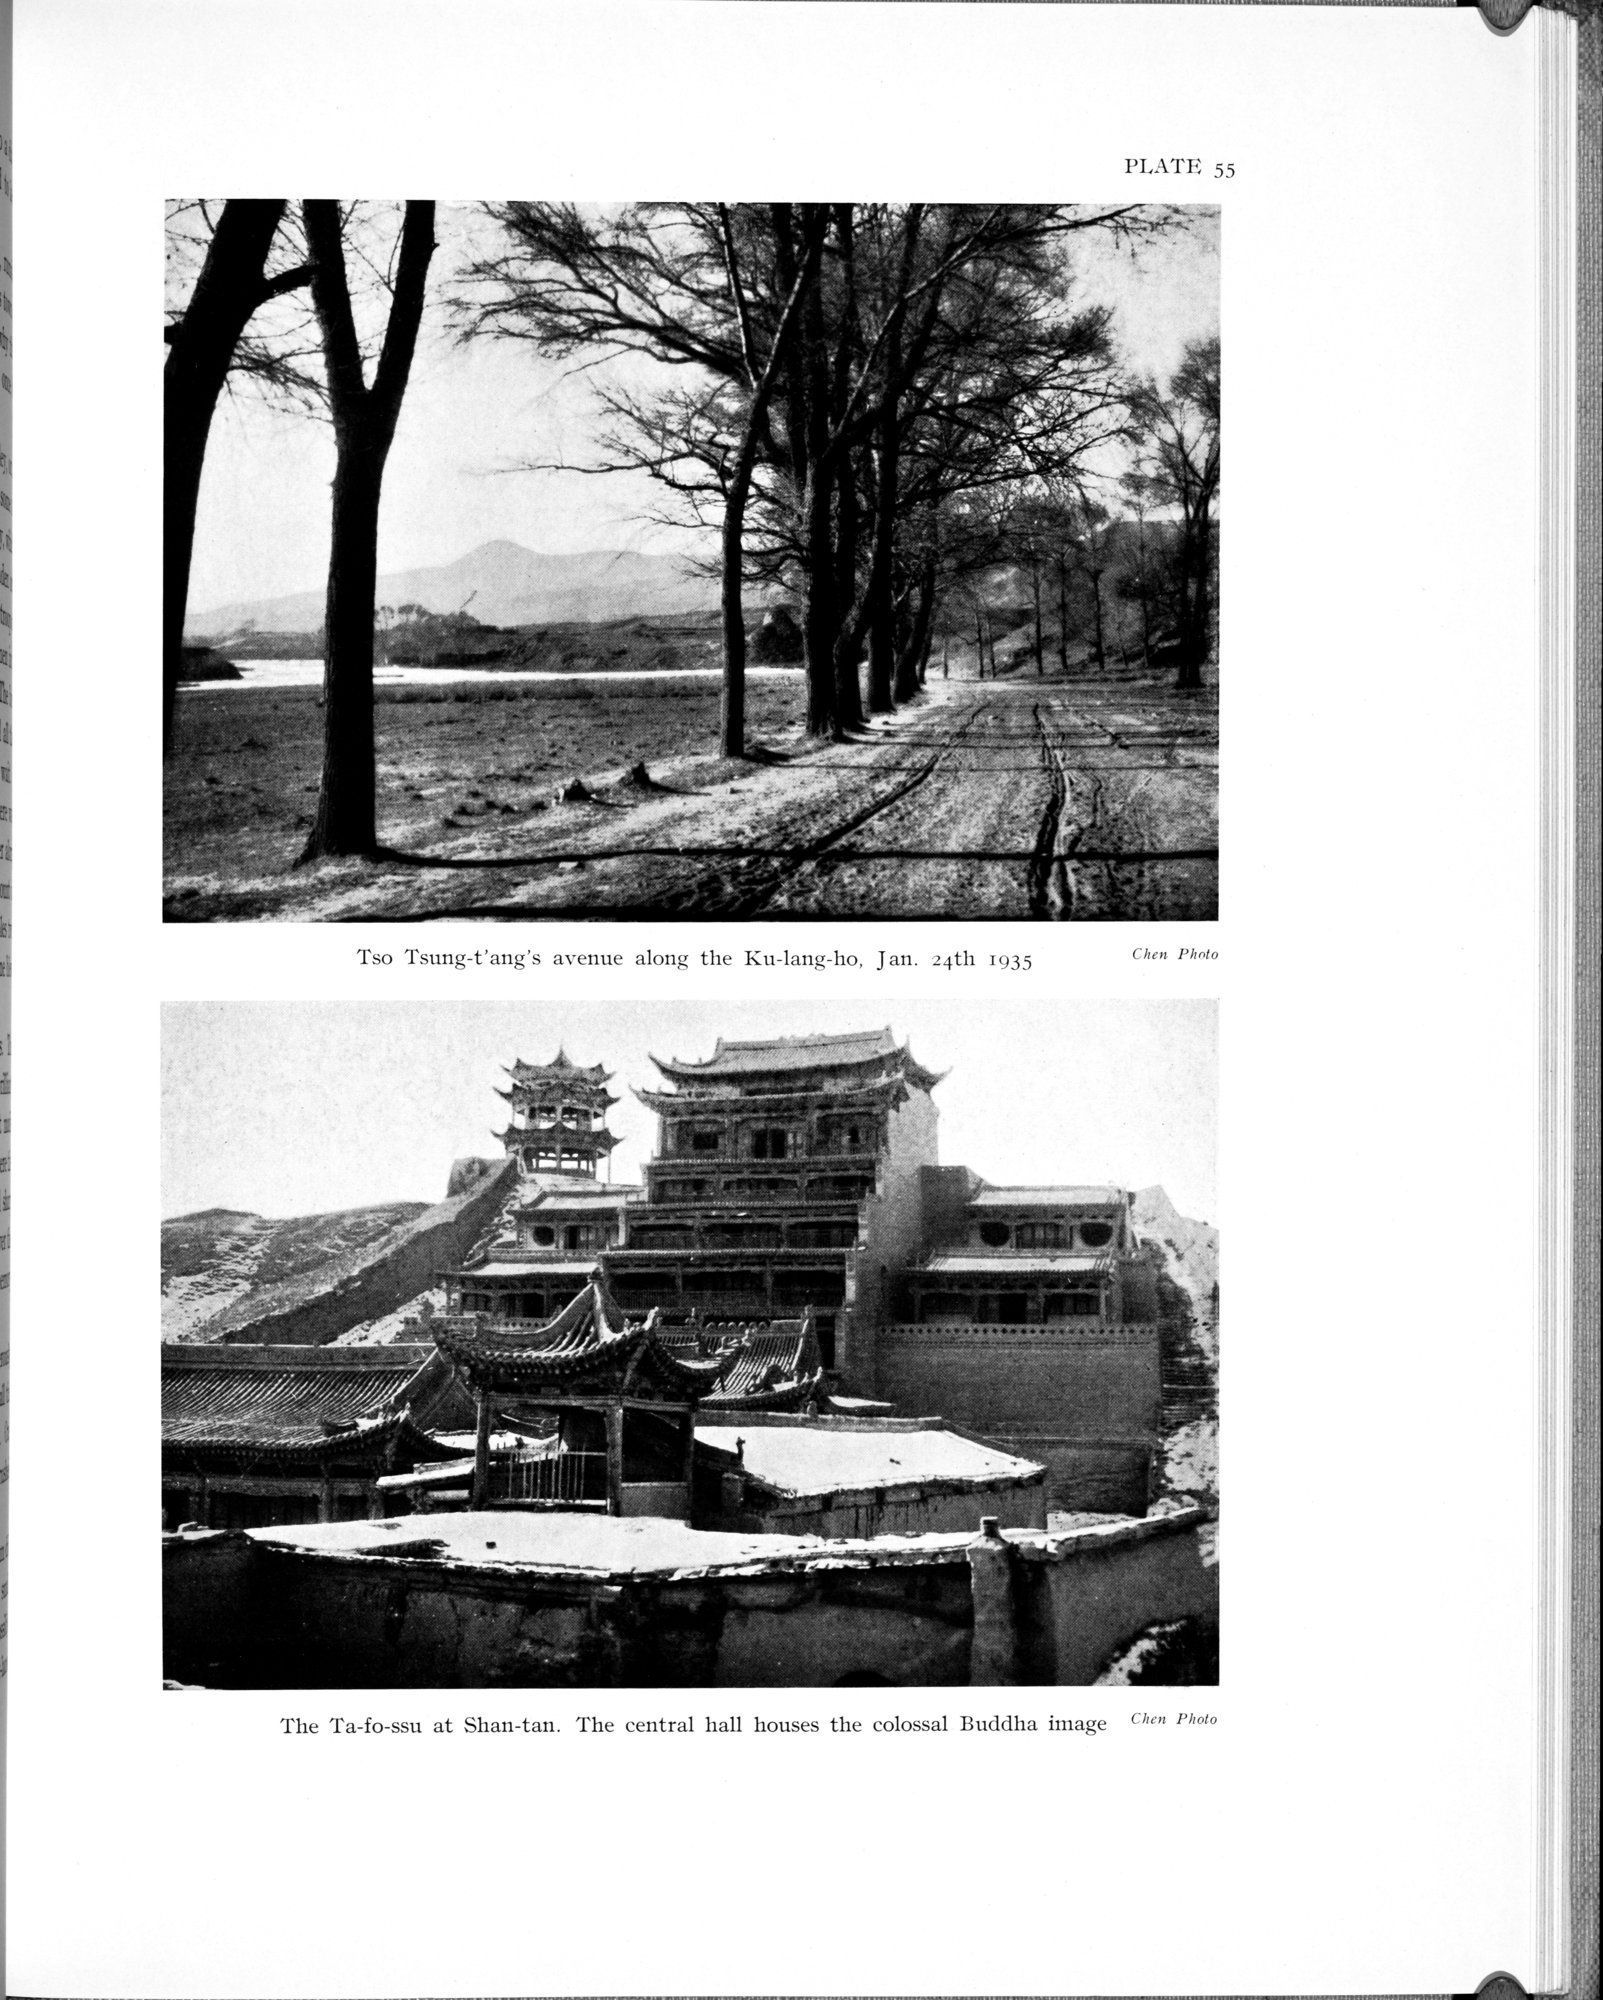 History of the Expedition in Asia, 1927-1935 : vol.3 / Page 363 (Grayscale High Resolution Image)